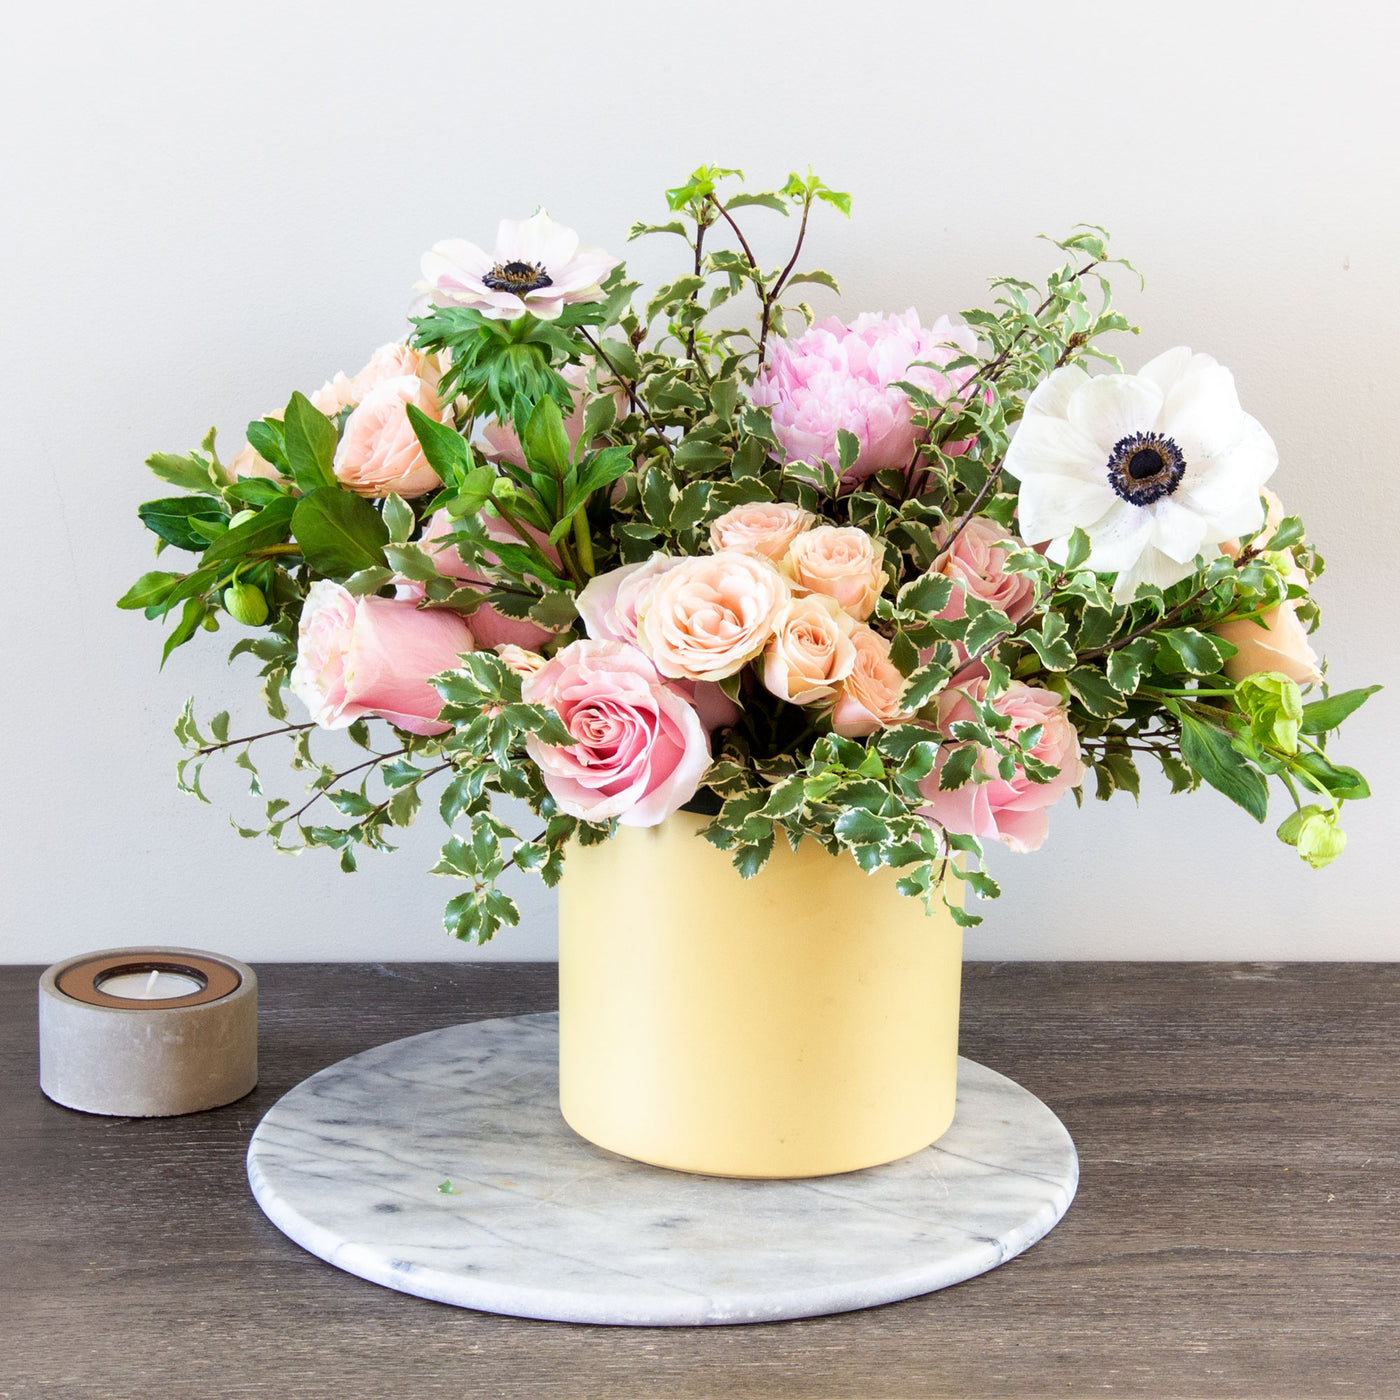 Our Portrait of a Lady bouquet delivers all the sweetness of spring. Beverly Hills Florist presents our wonderful arrangement for same day delivery ! A garden-fresh gathering of peach and pink Roses and Anemones in yellow container accented by wispy greens. It’s a gift full of warmth and happiness.